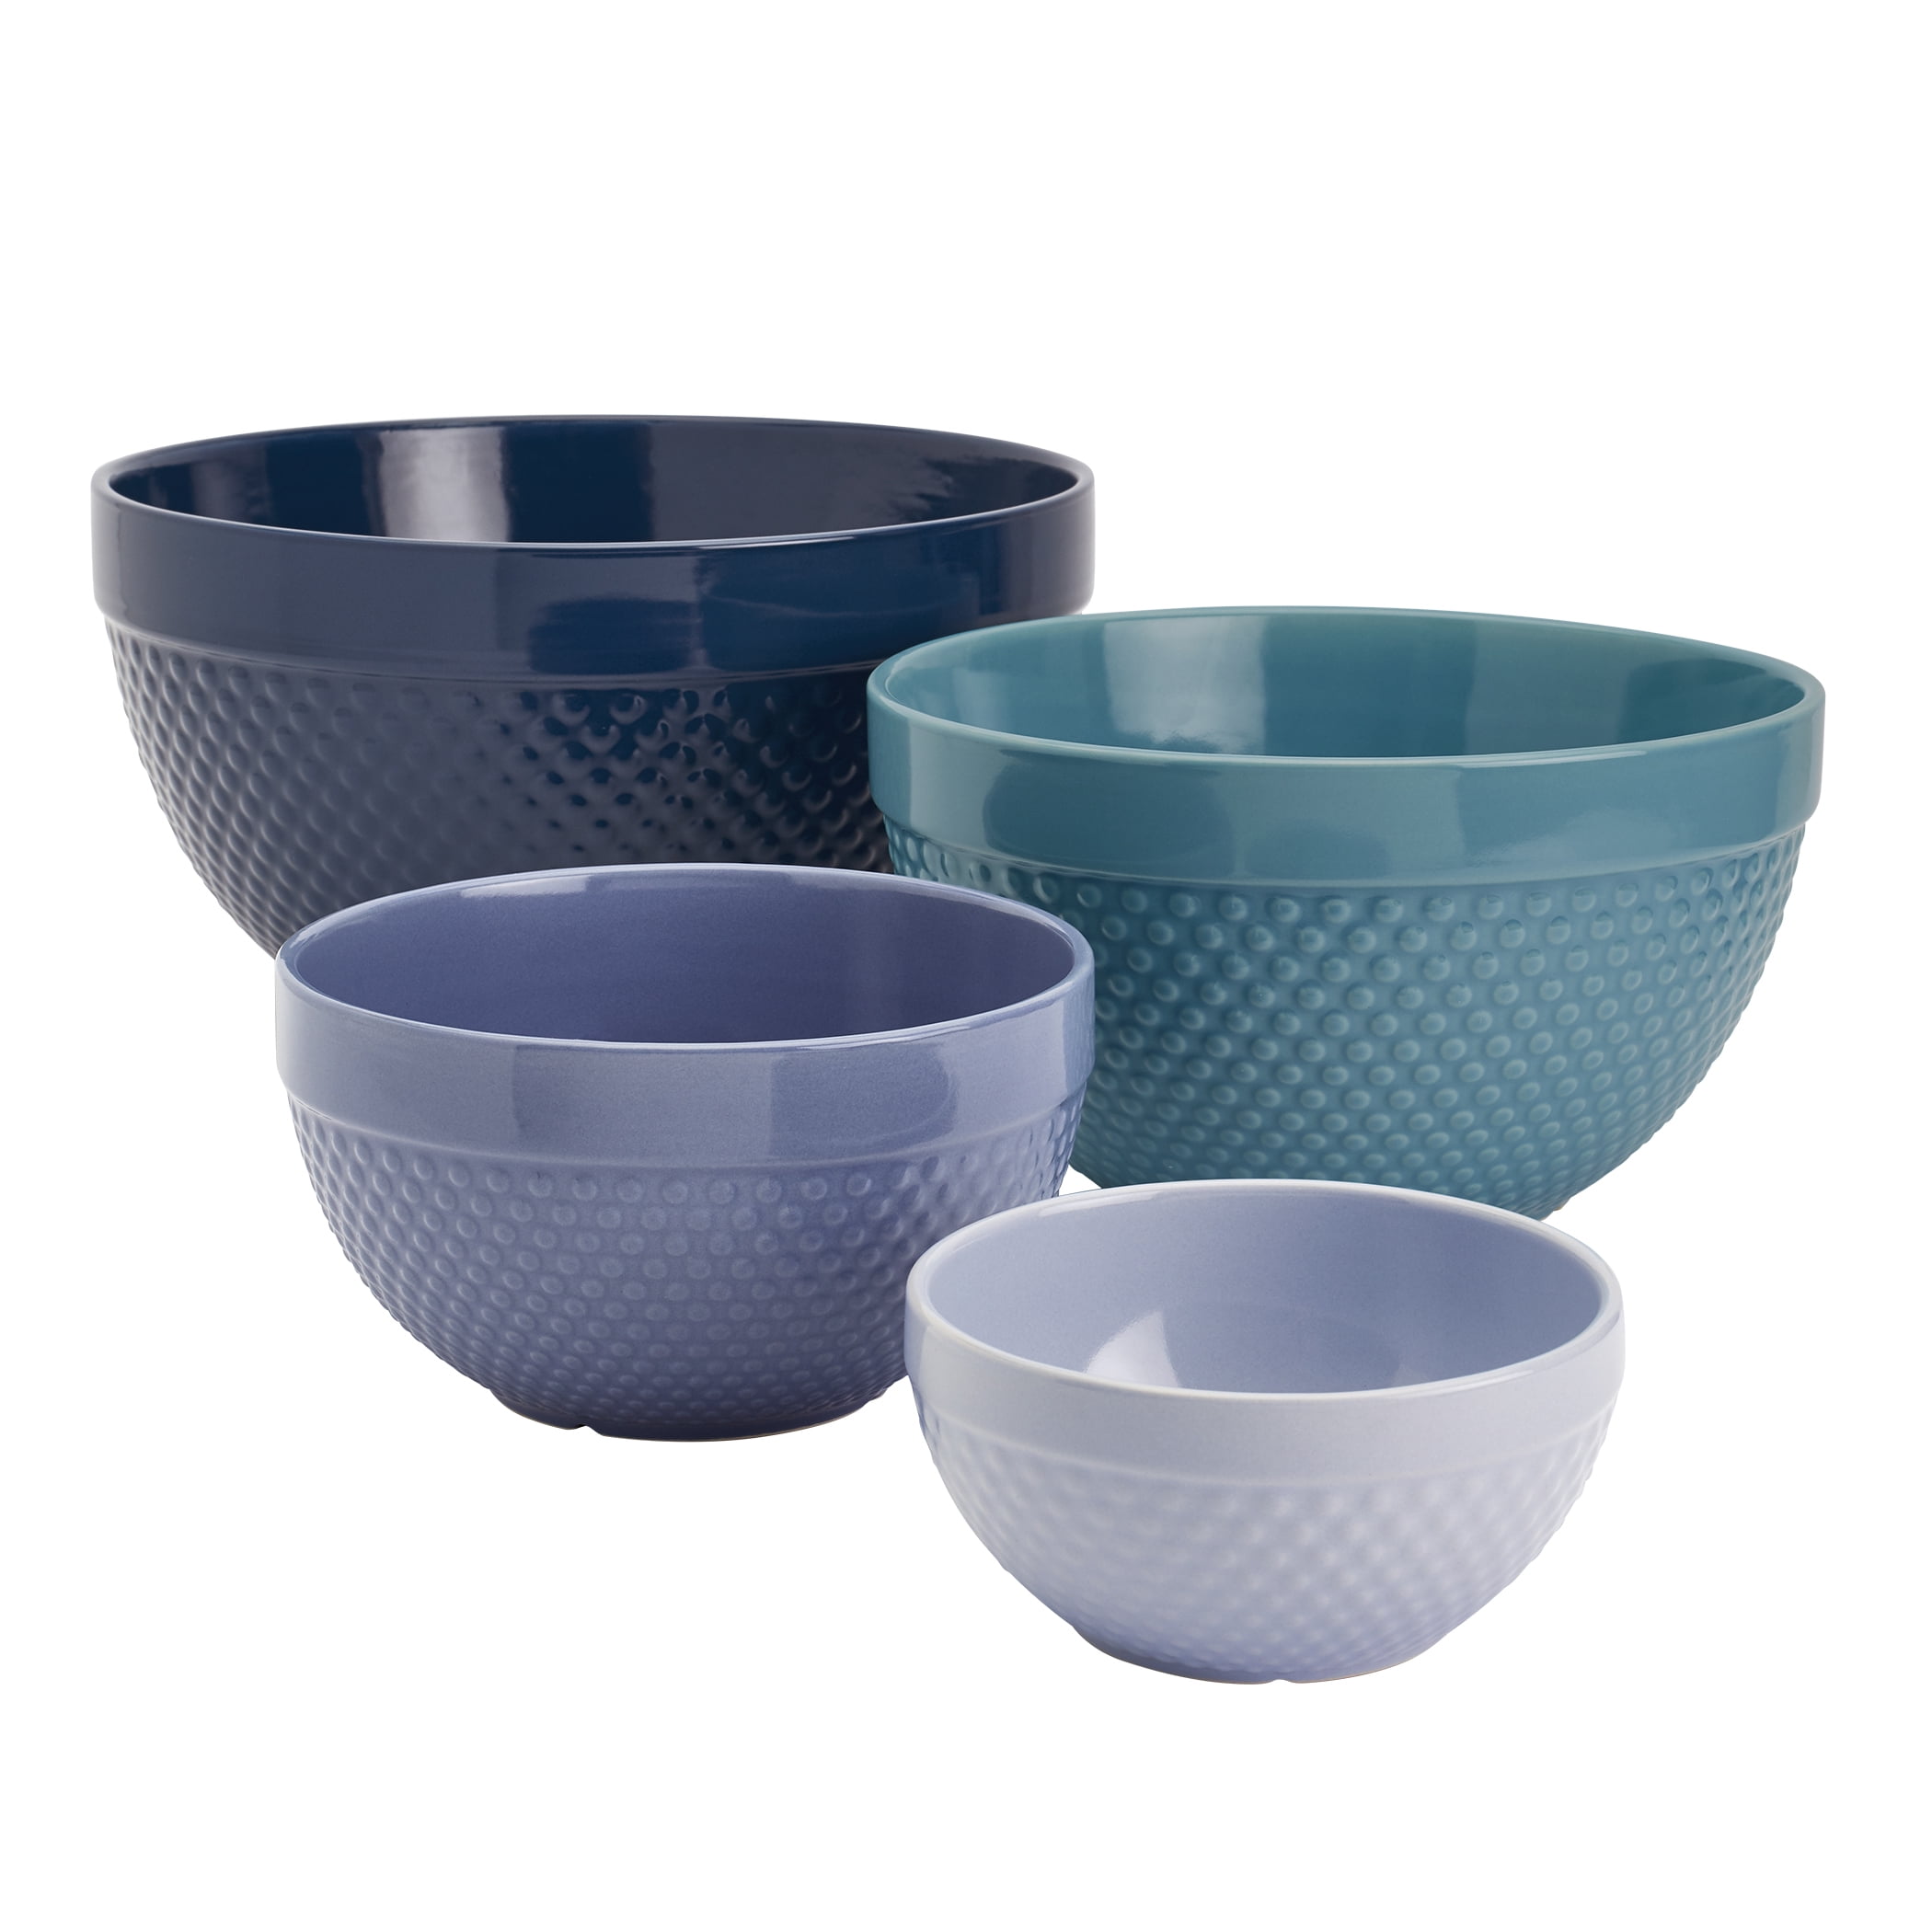 Light Blue Mixing Bowls with Lids - Set of 4